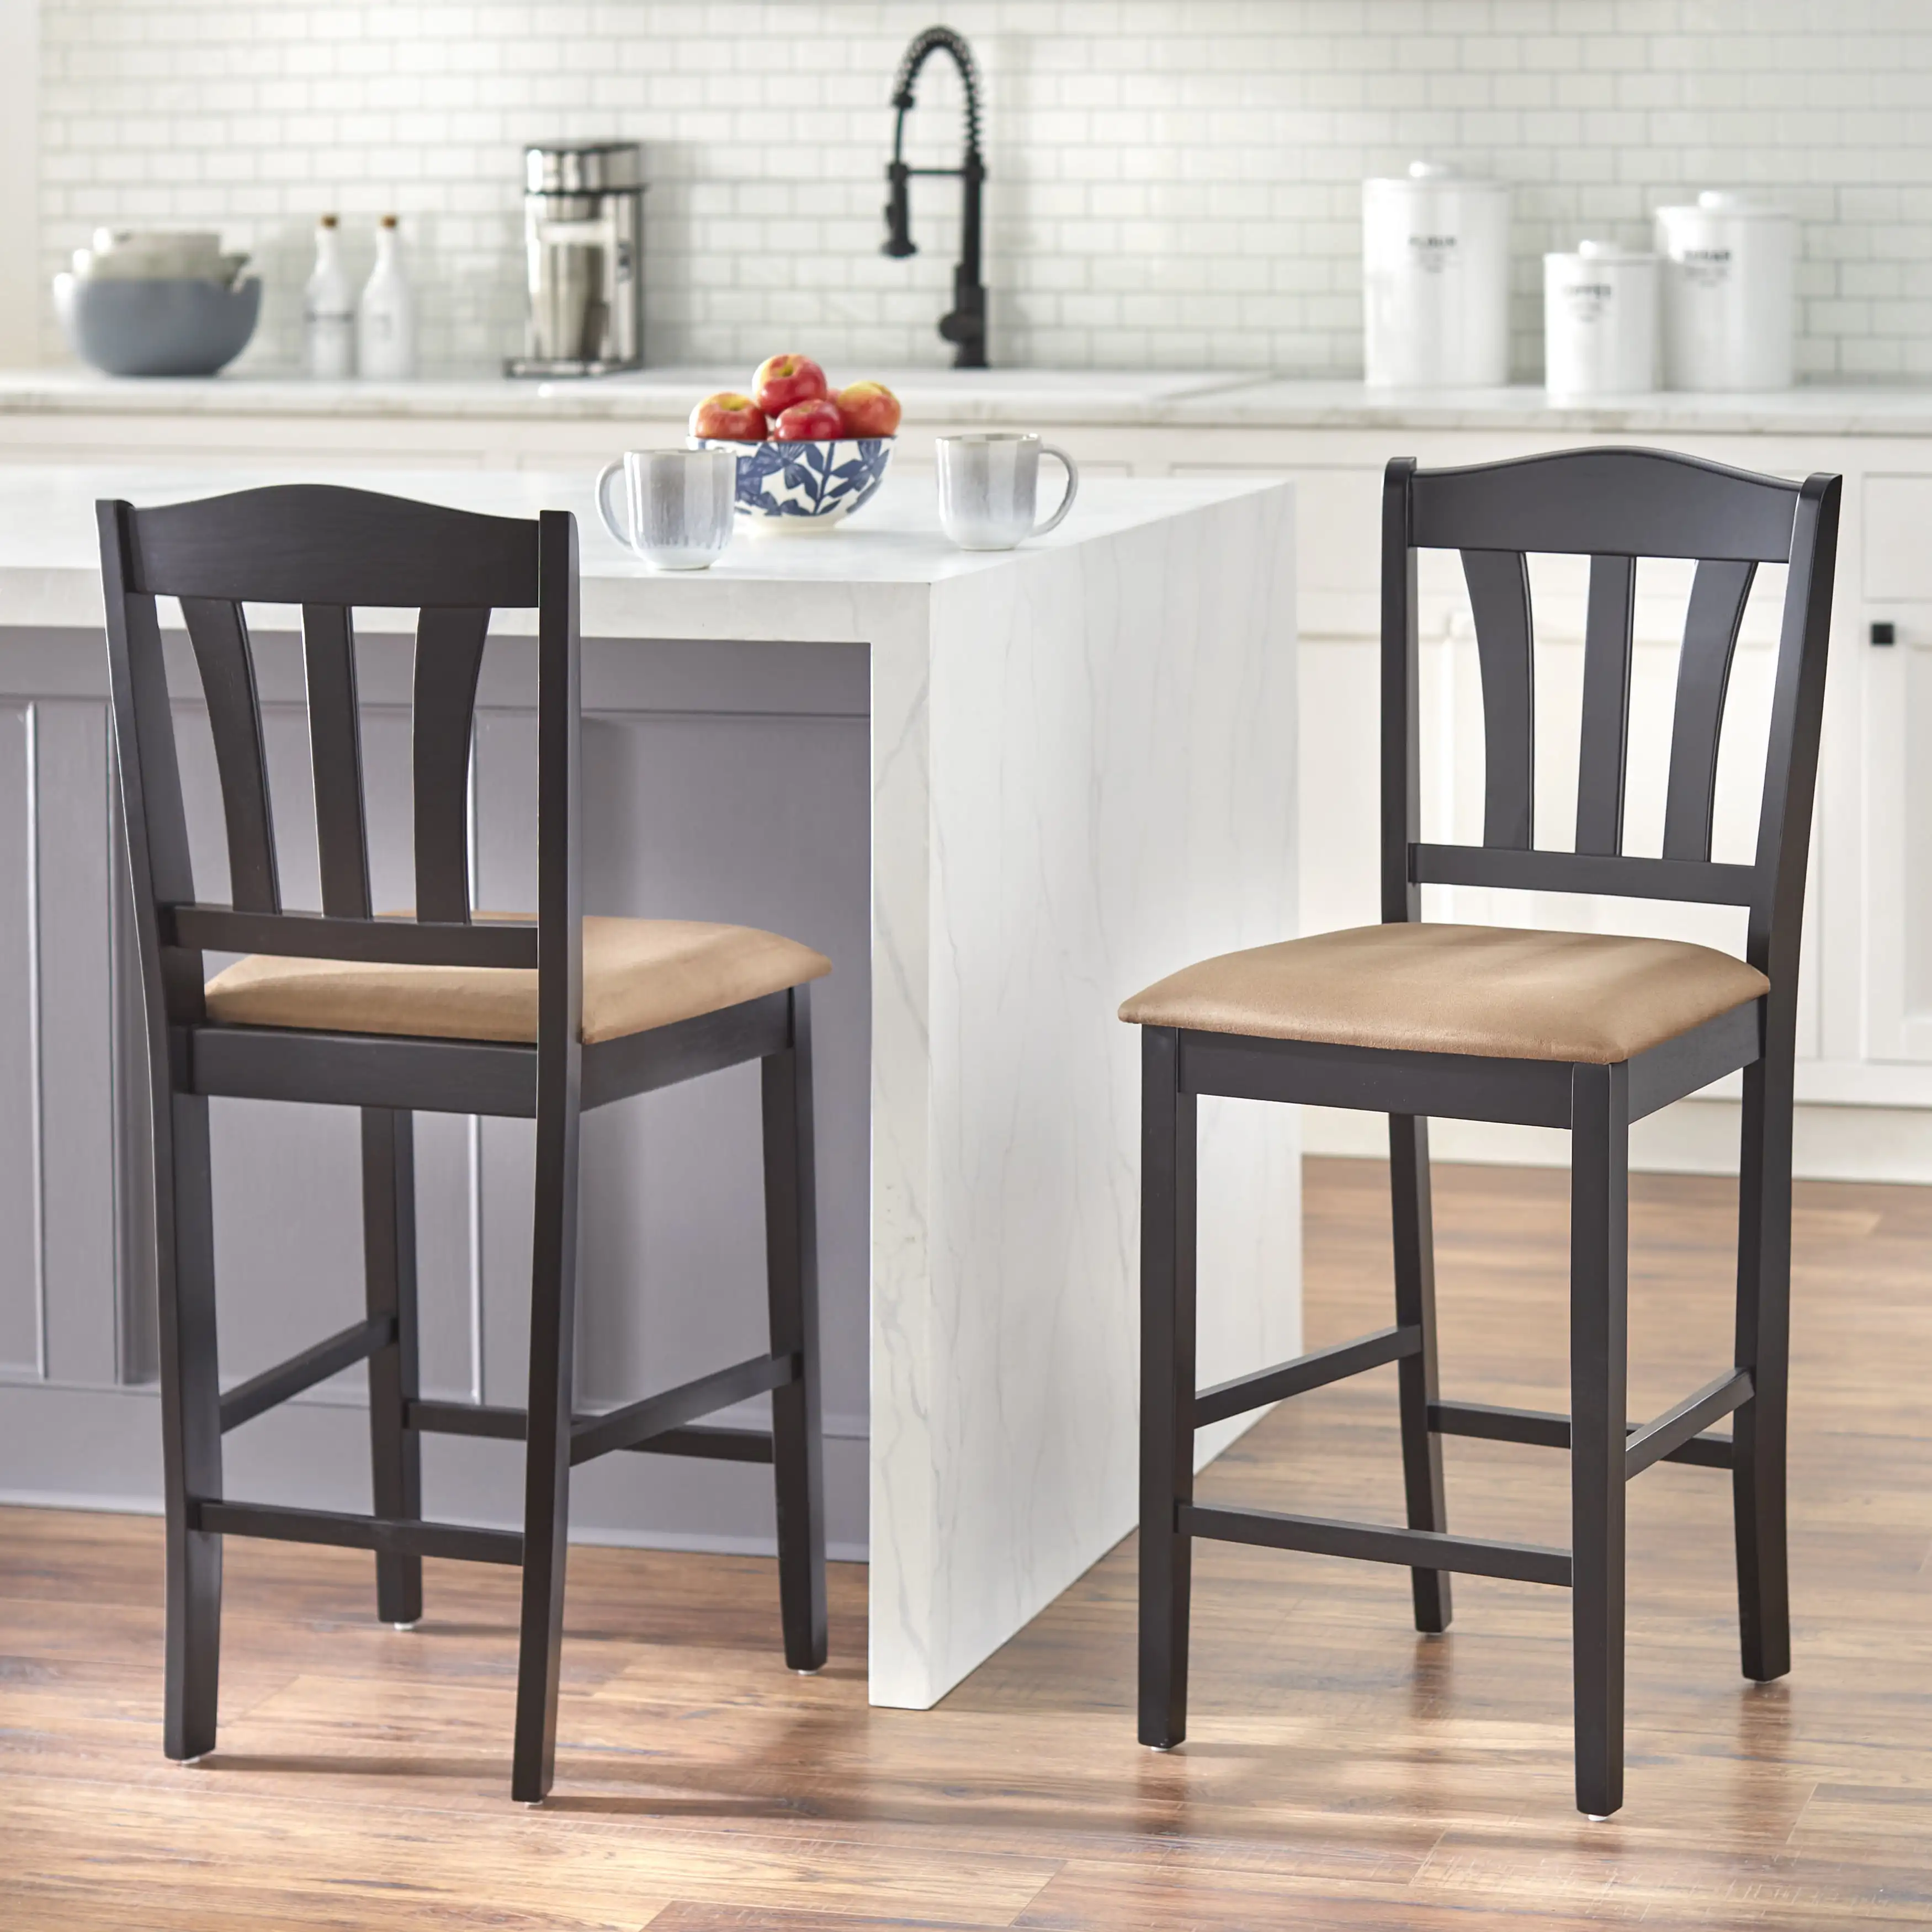 

24" Counter Height Stools Set of 2 Upholstered Bar Chairs w/ Back